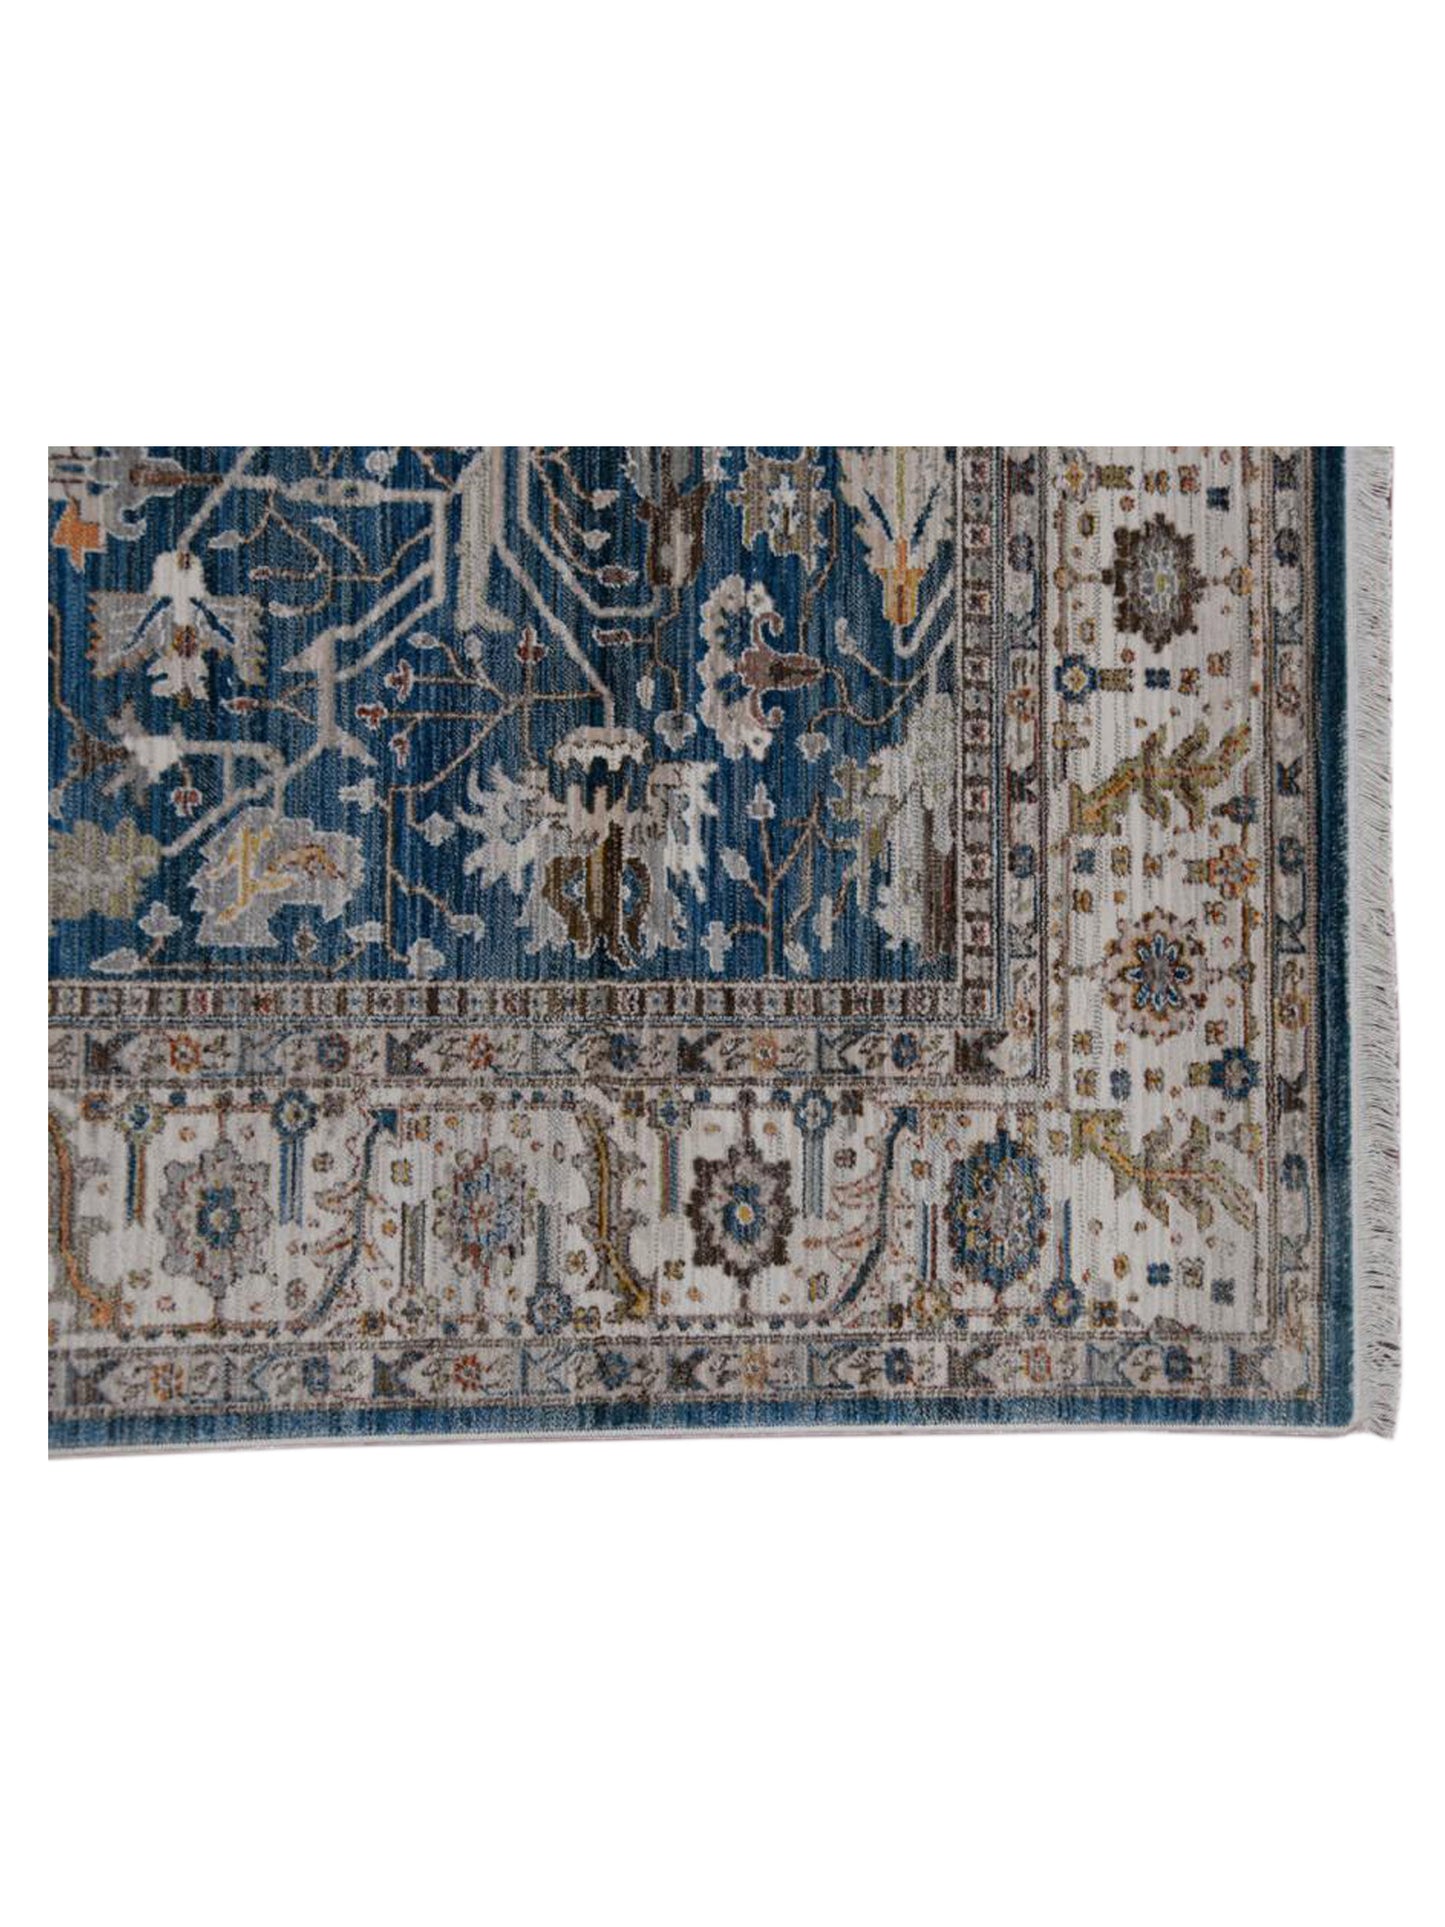 Limited Dolly DA-205 NAVY BLUE IVORY Traditional Machinemade Rug